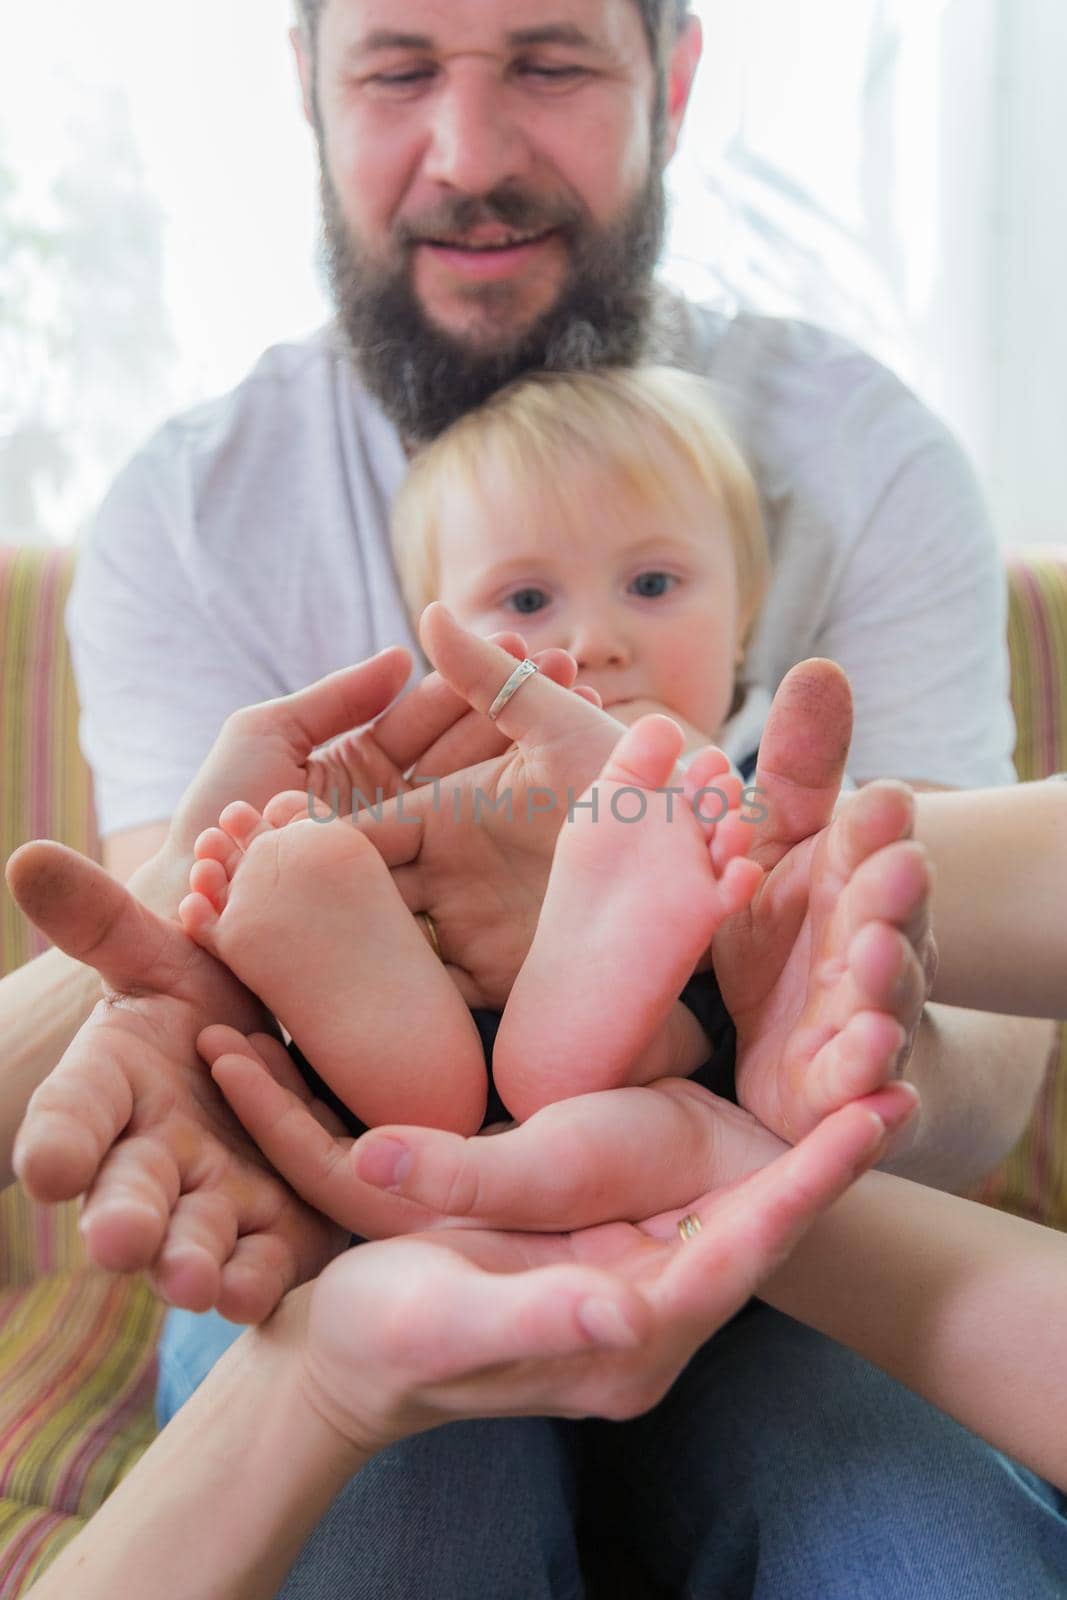 Parents and children hold the baby's heels in the palms of their hands. by Yurich32